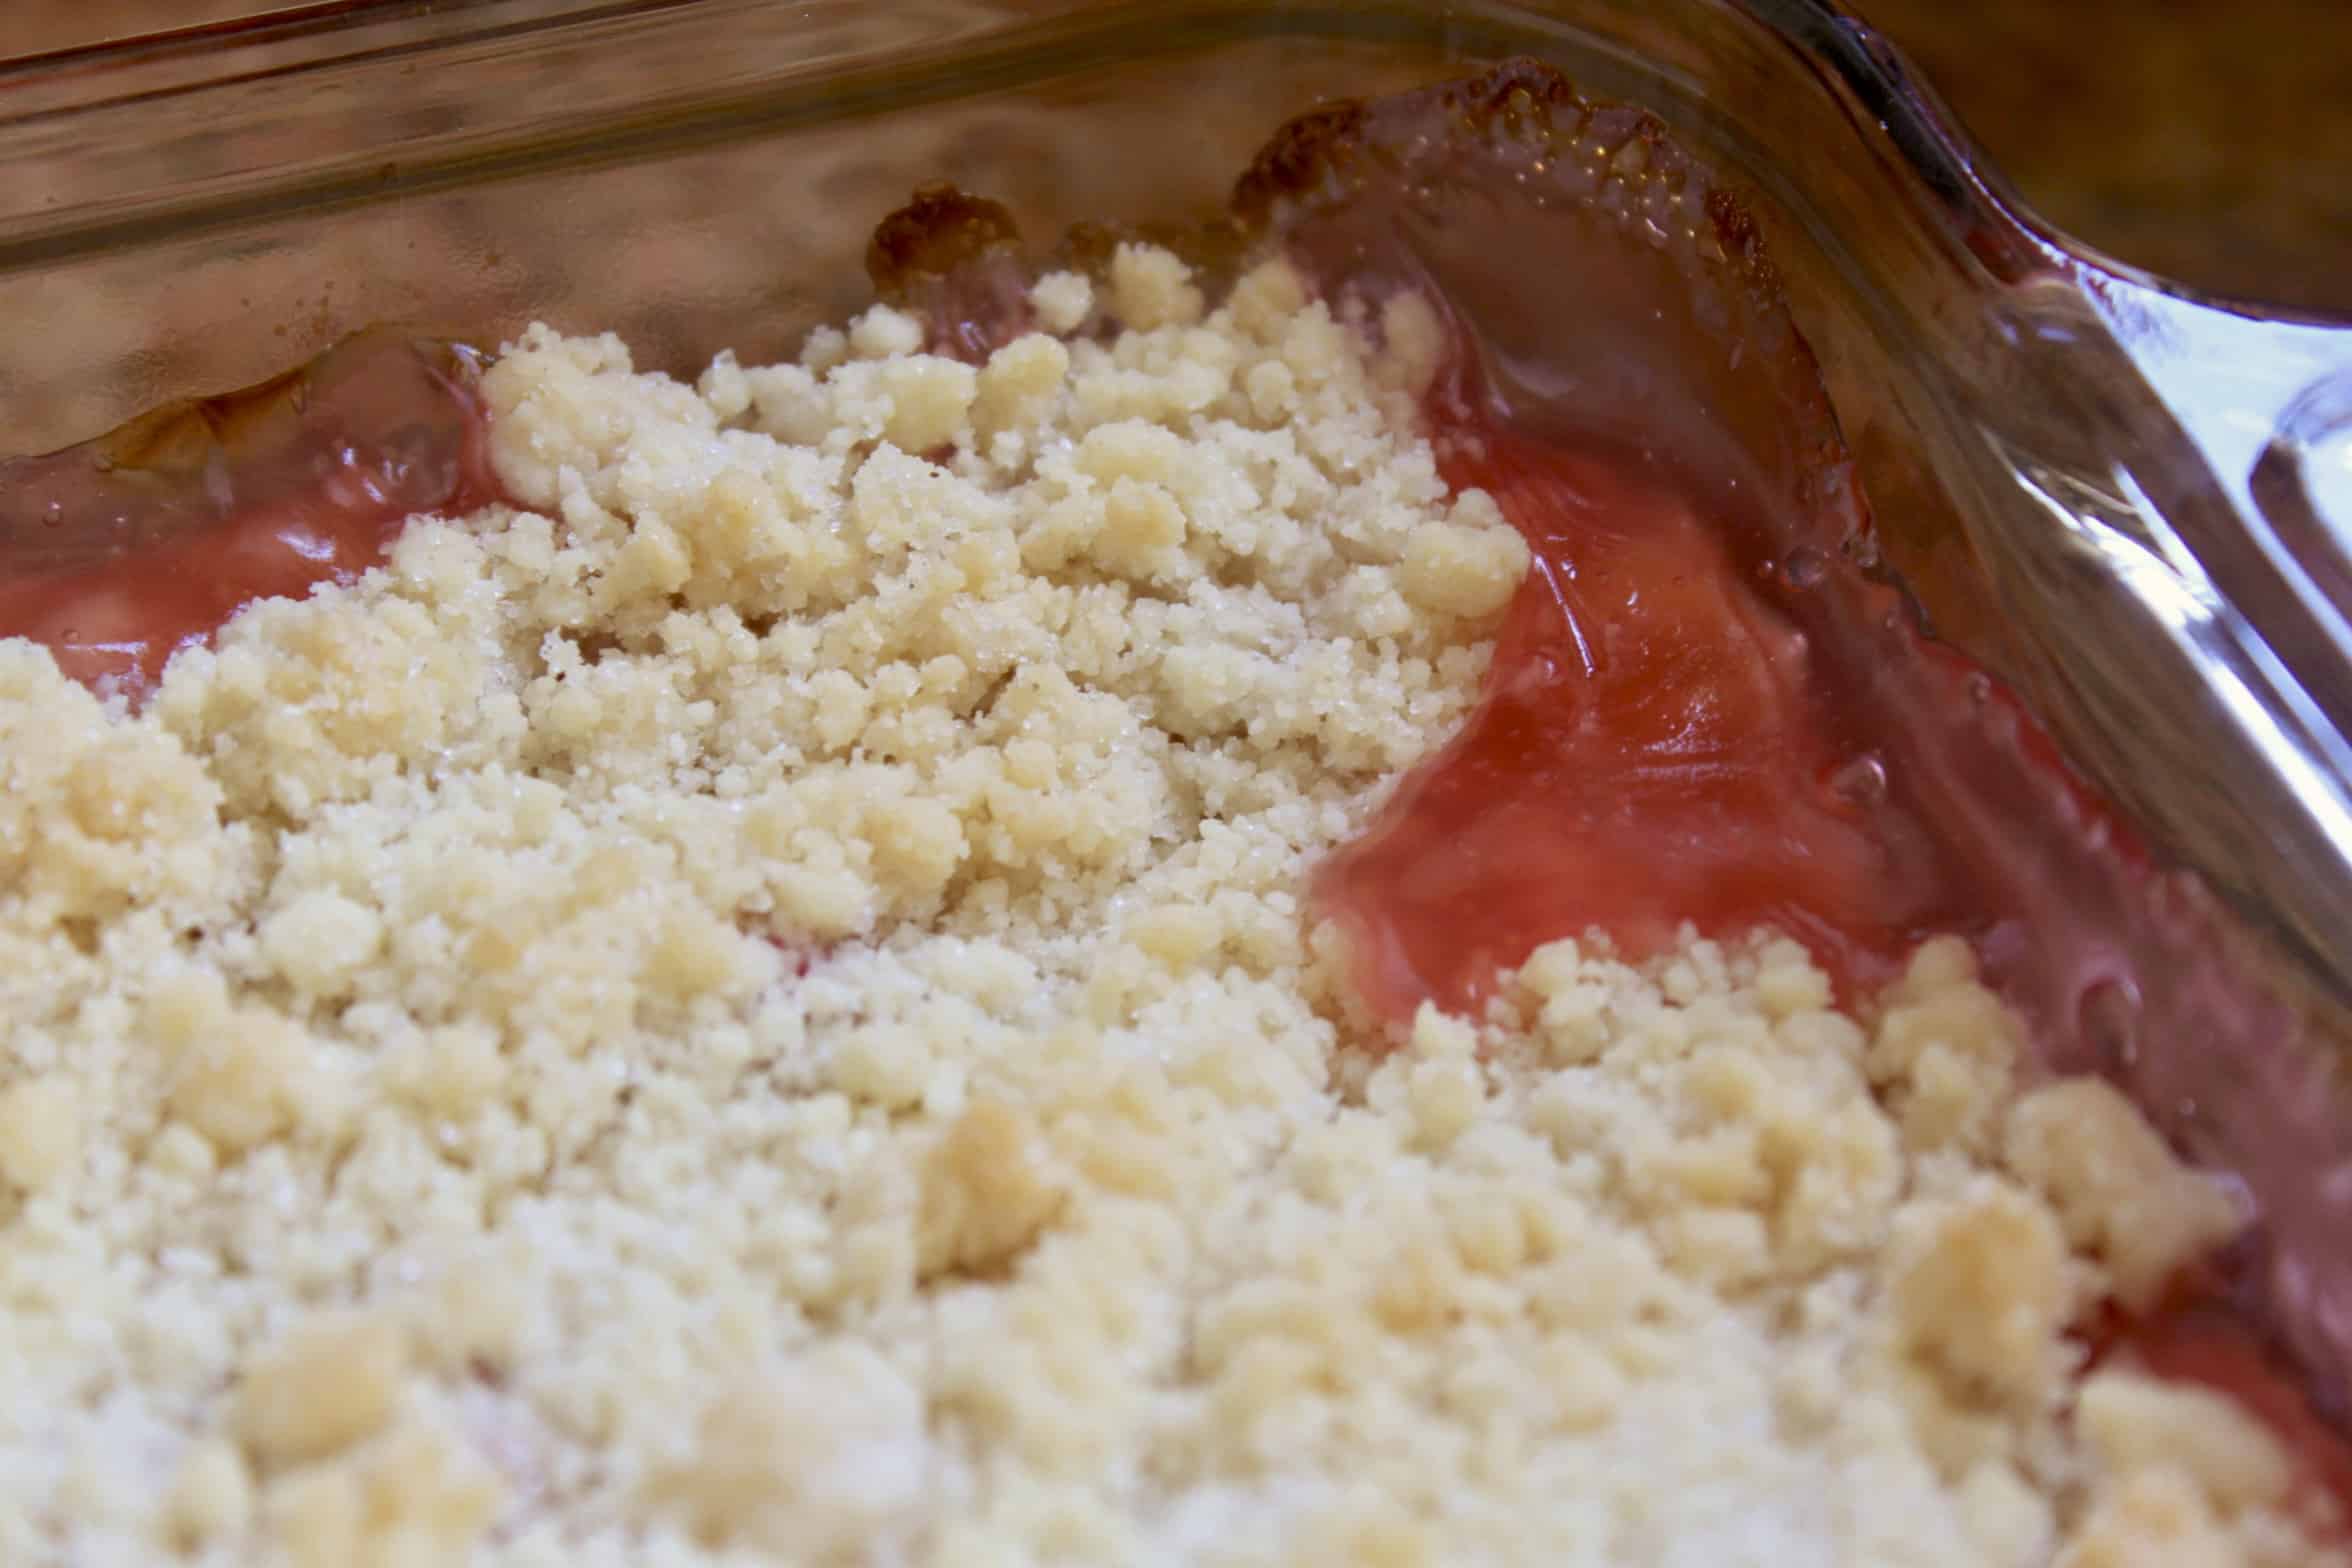 rhubarb crumble out of the oven